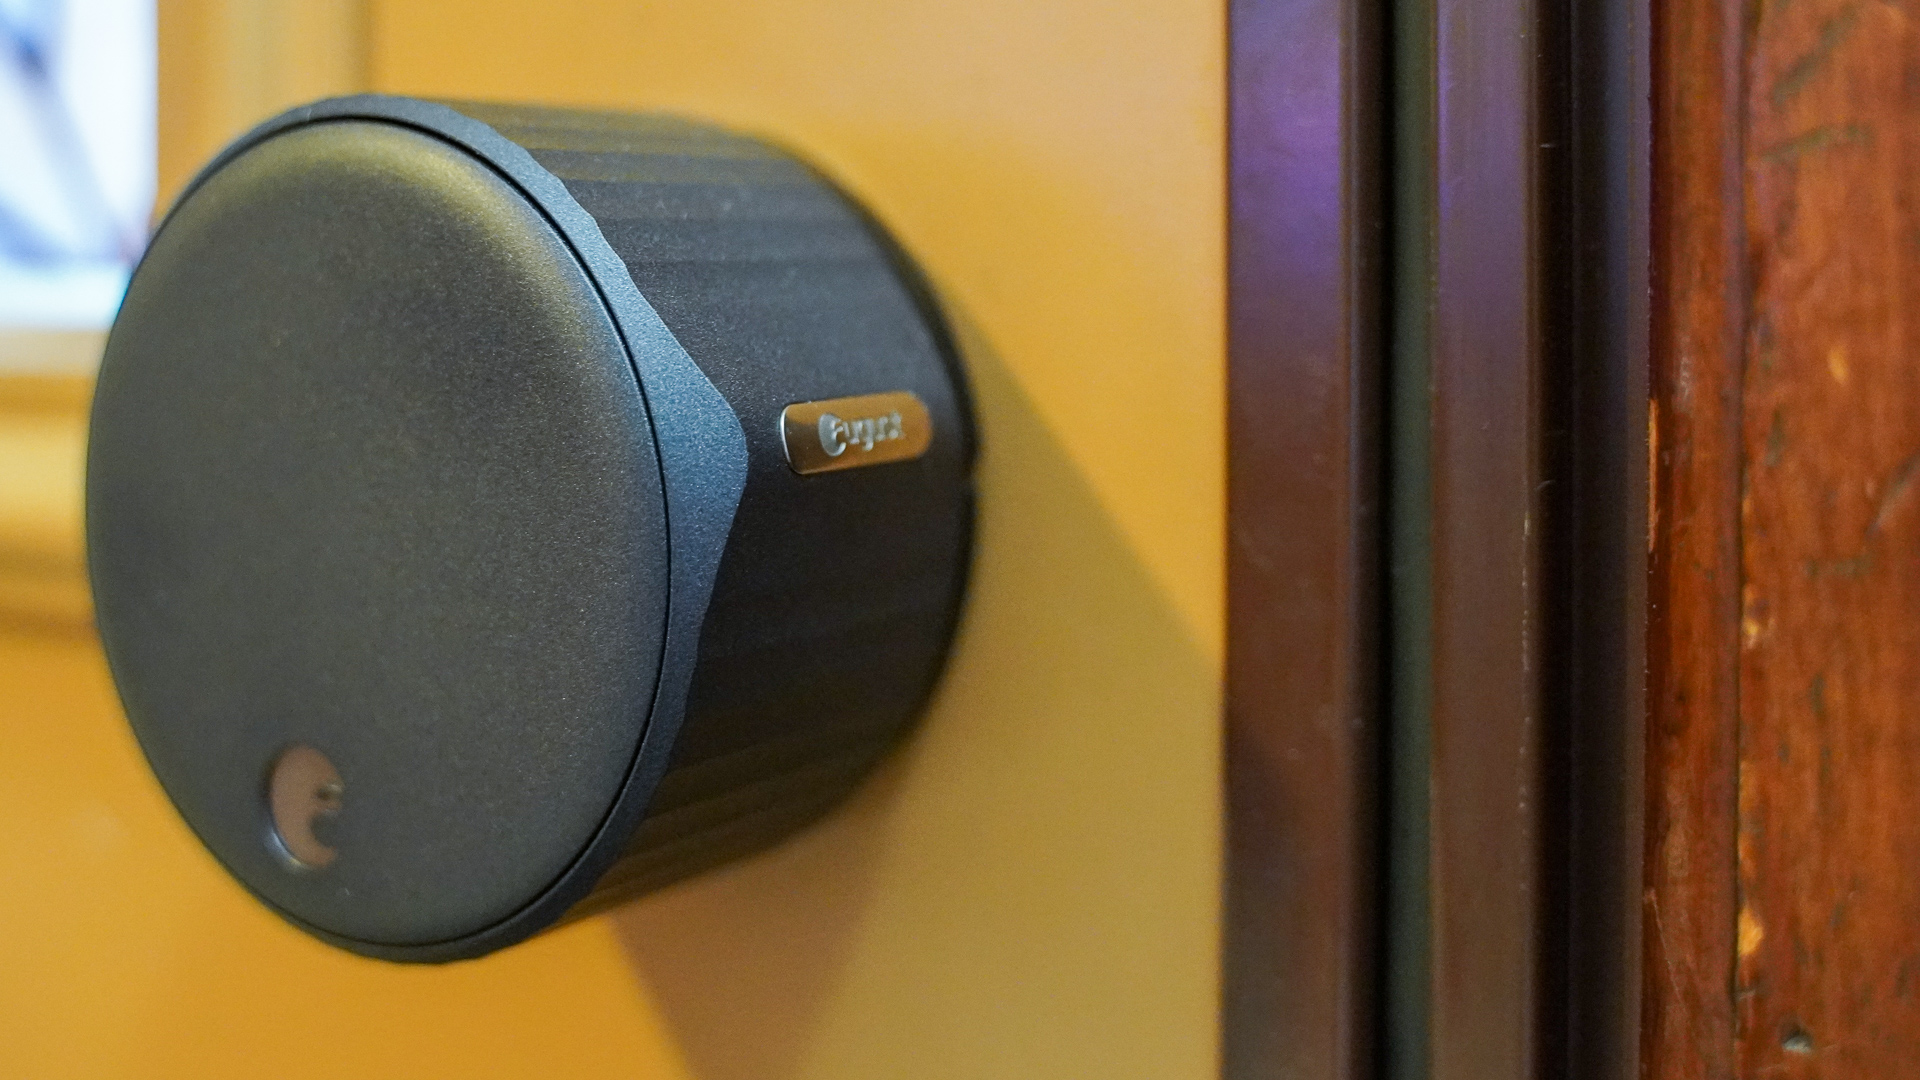 August smart lock side profile - The best Alexa devices